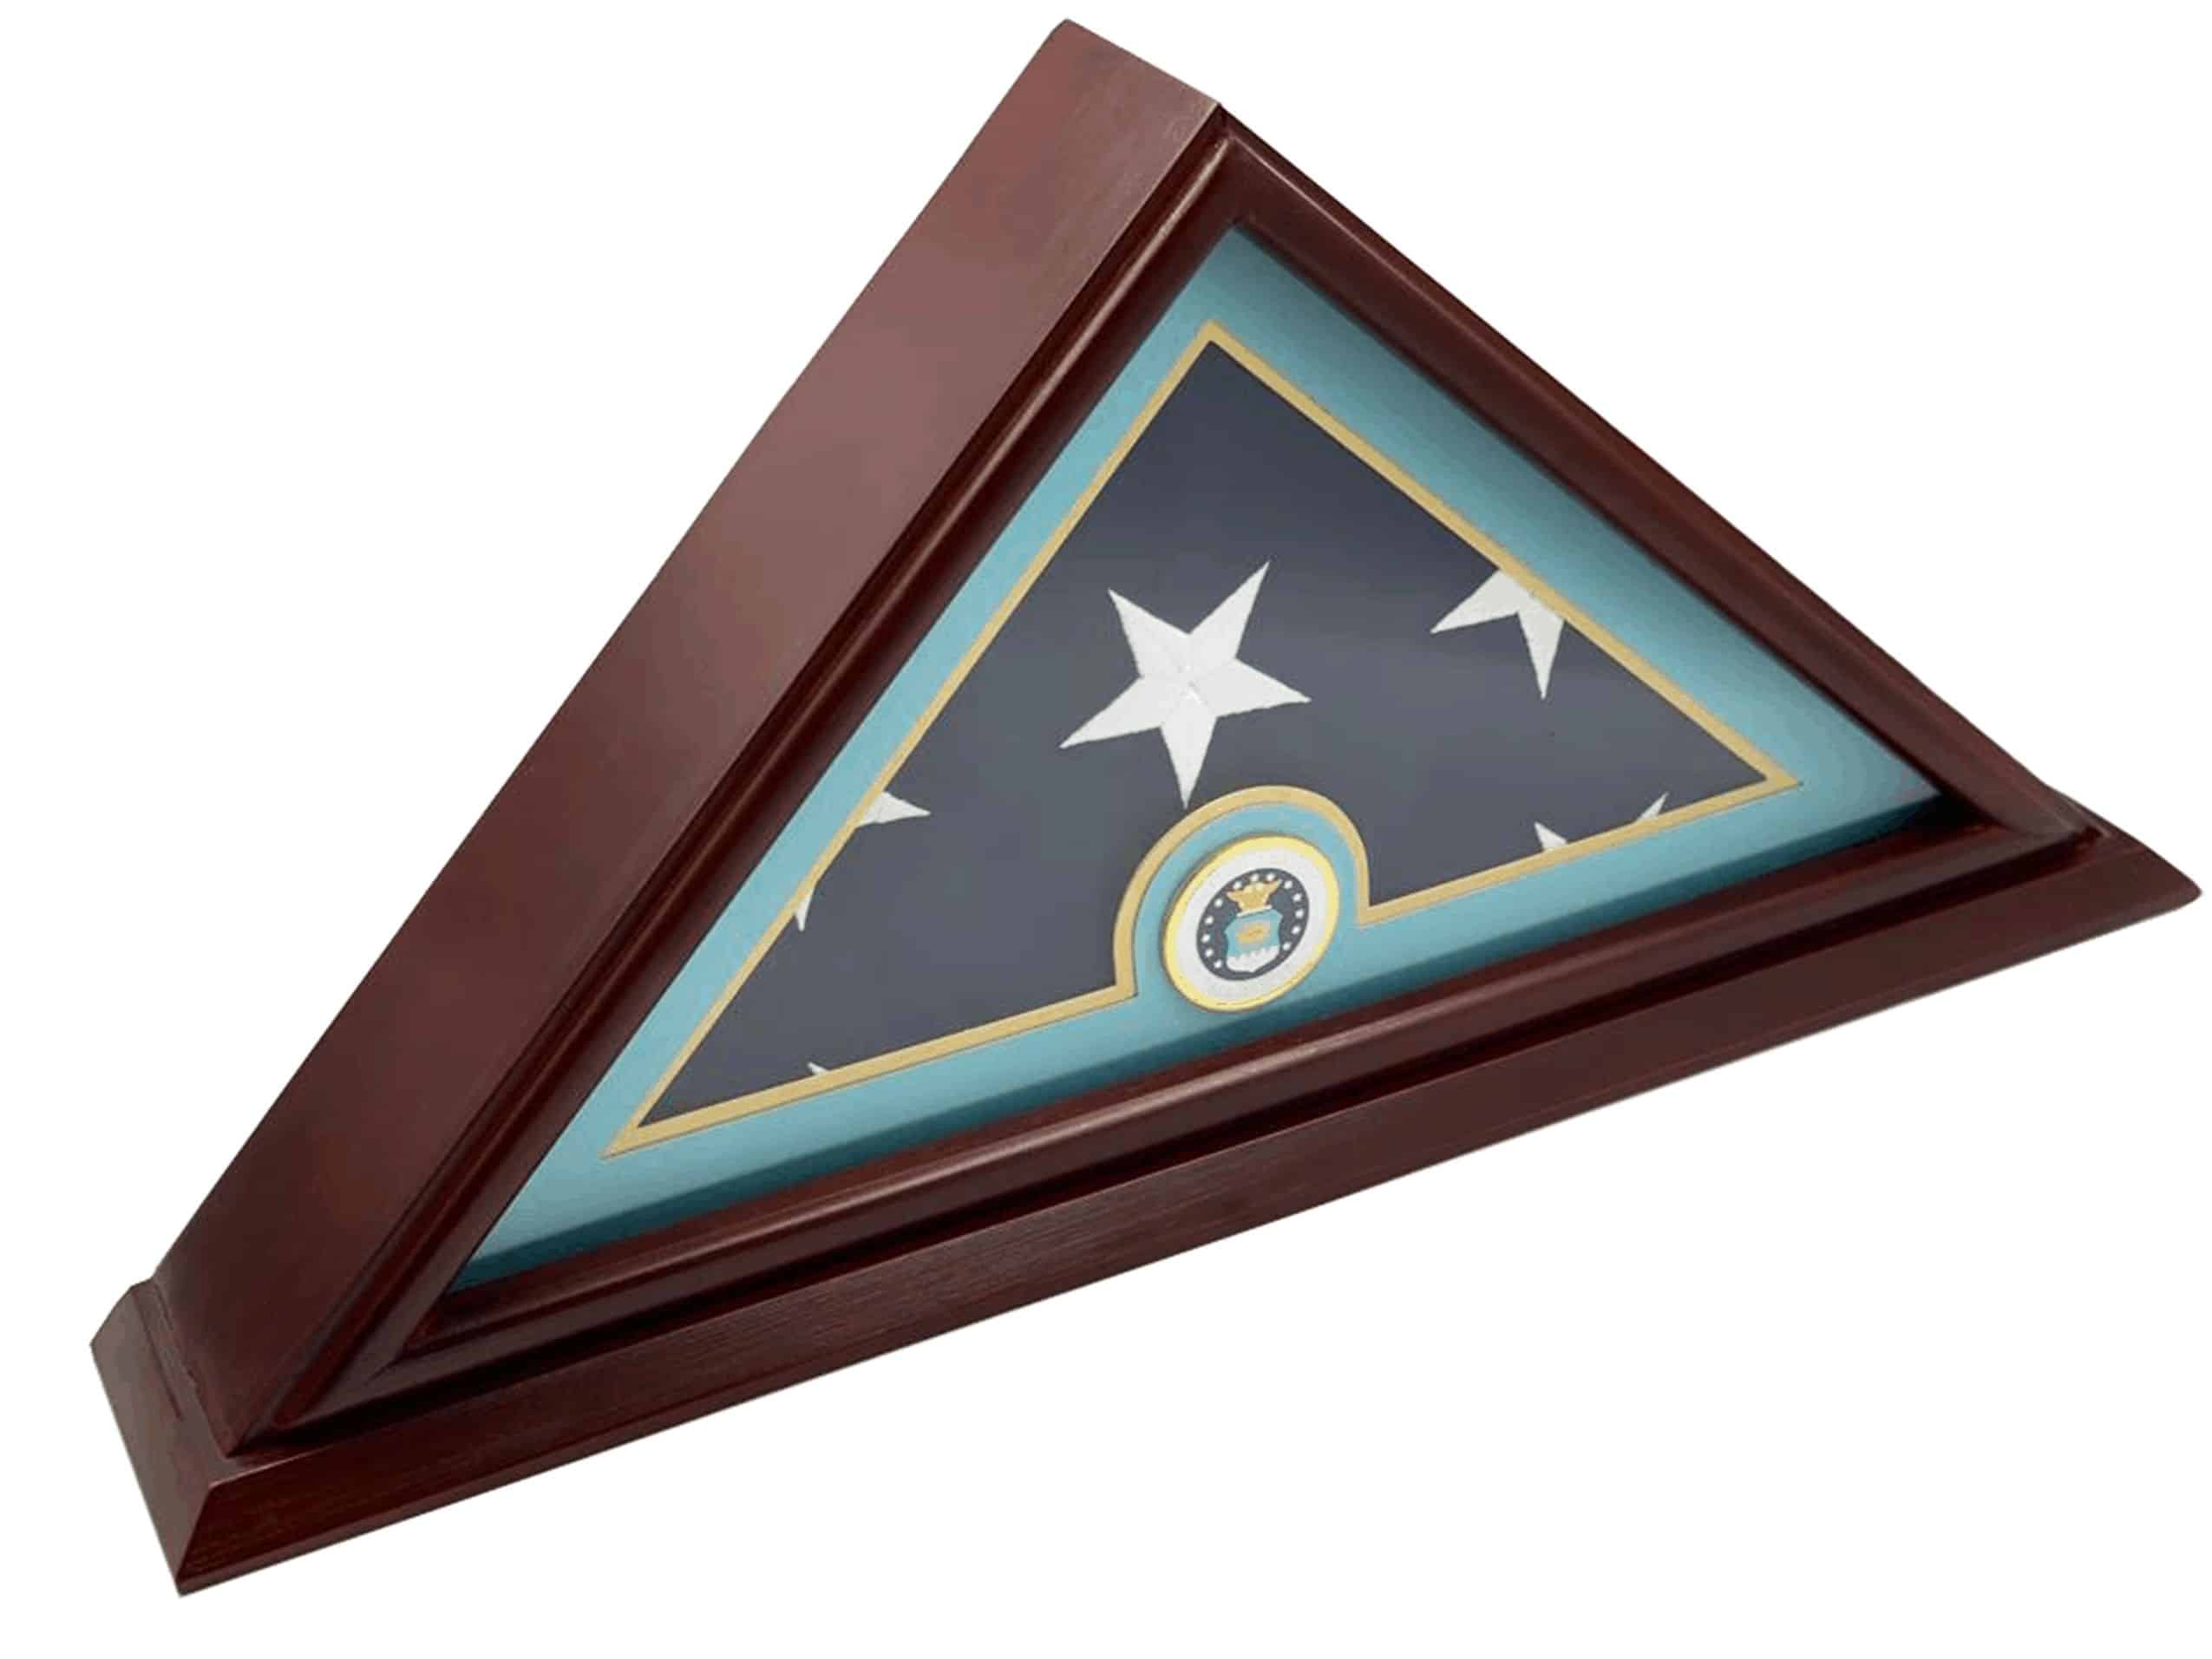 DECOMIL - AIR FORCE Flag Display Case Box, 5x9 Burial - Funeral - Veteran Flag Elegant Display Case with small Base, Solid Wood, Cherry Finish - DECOMIL